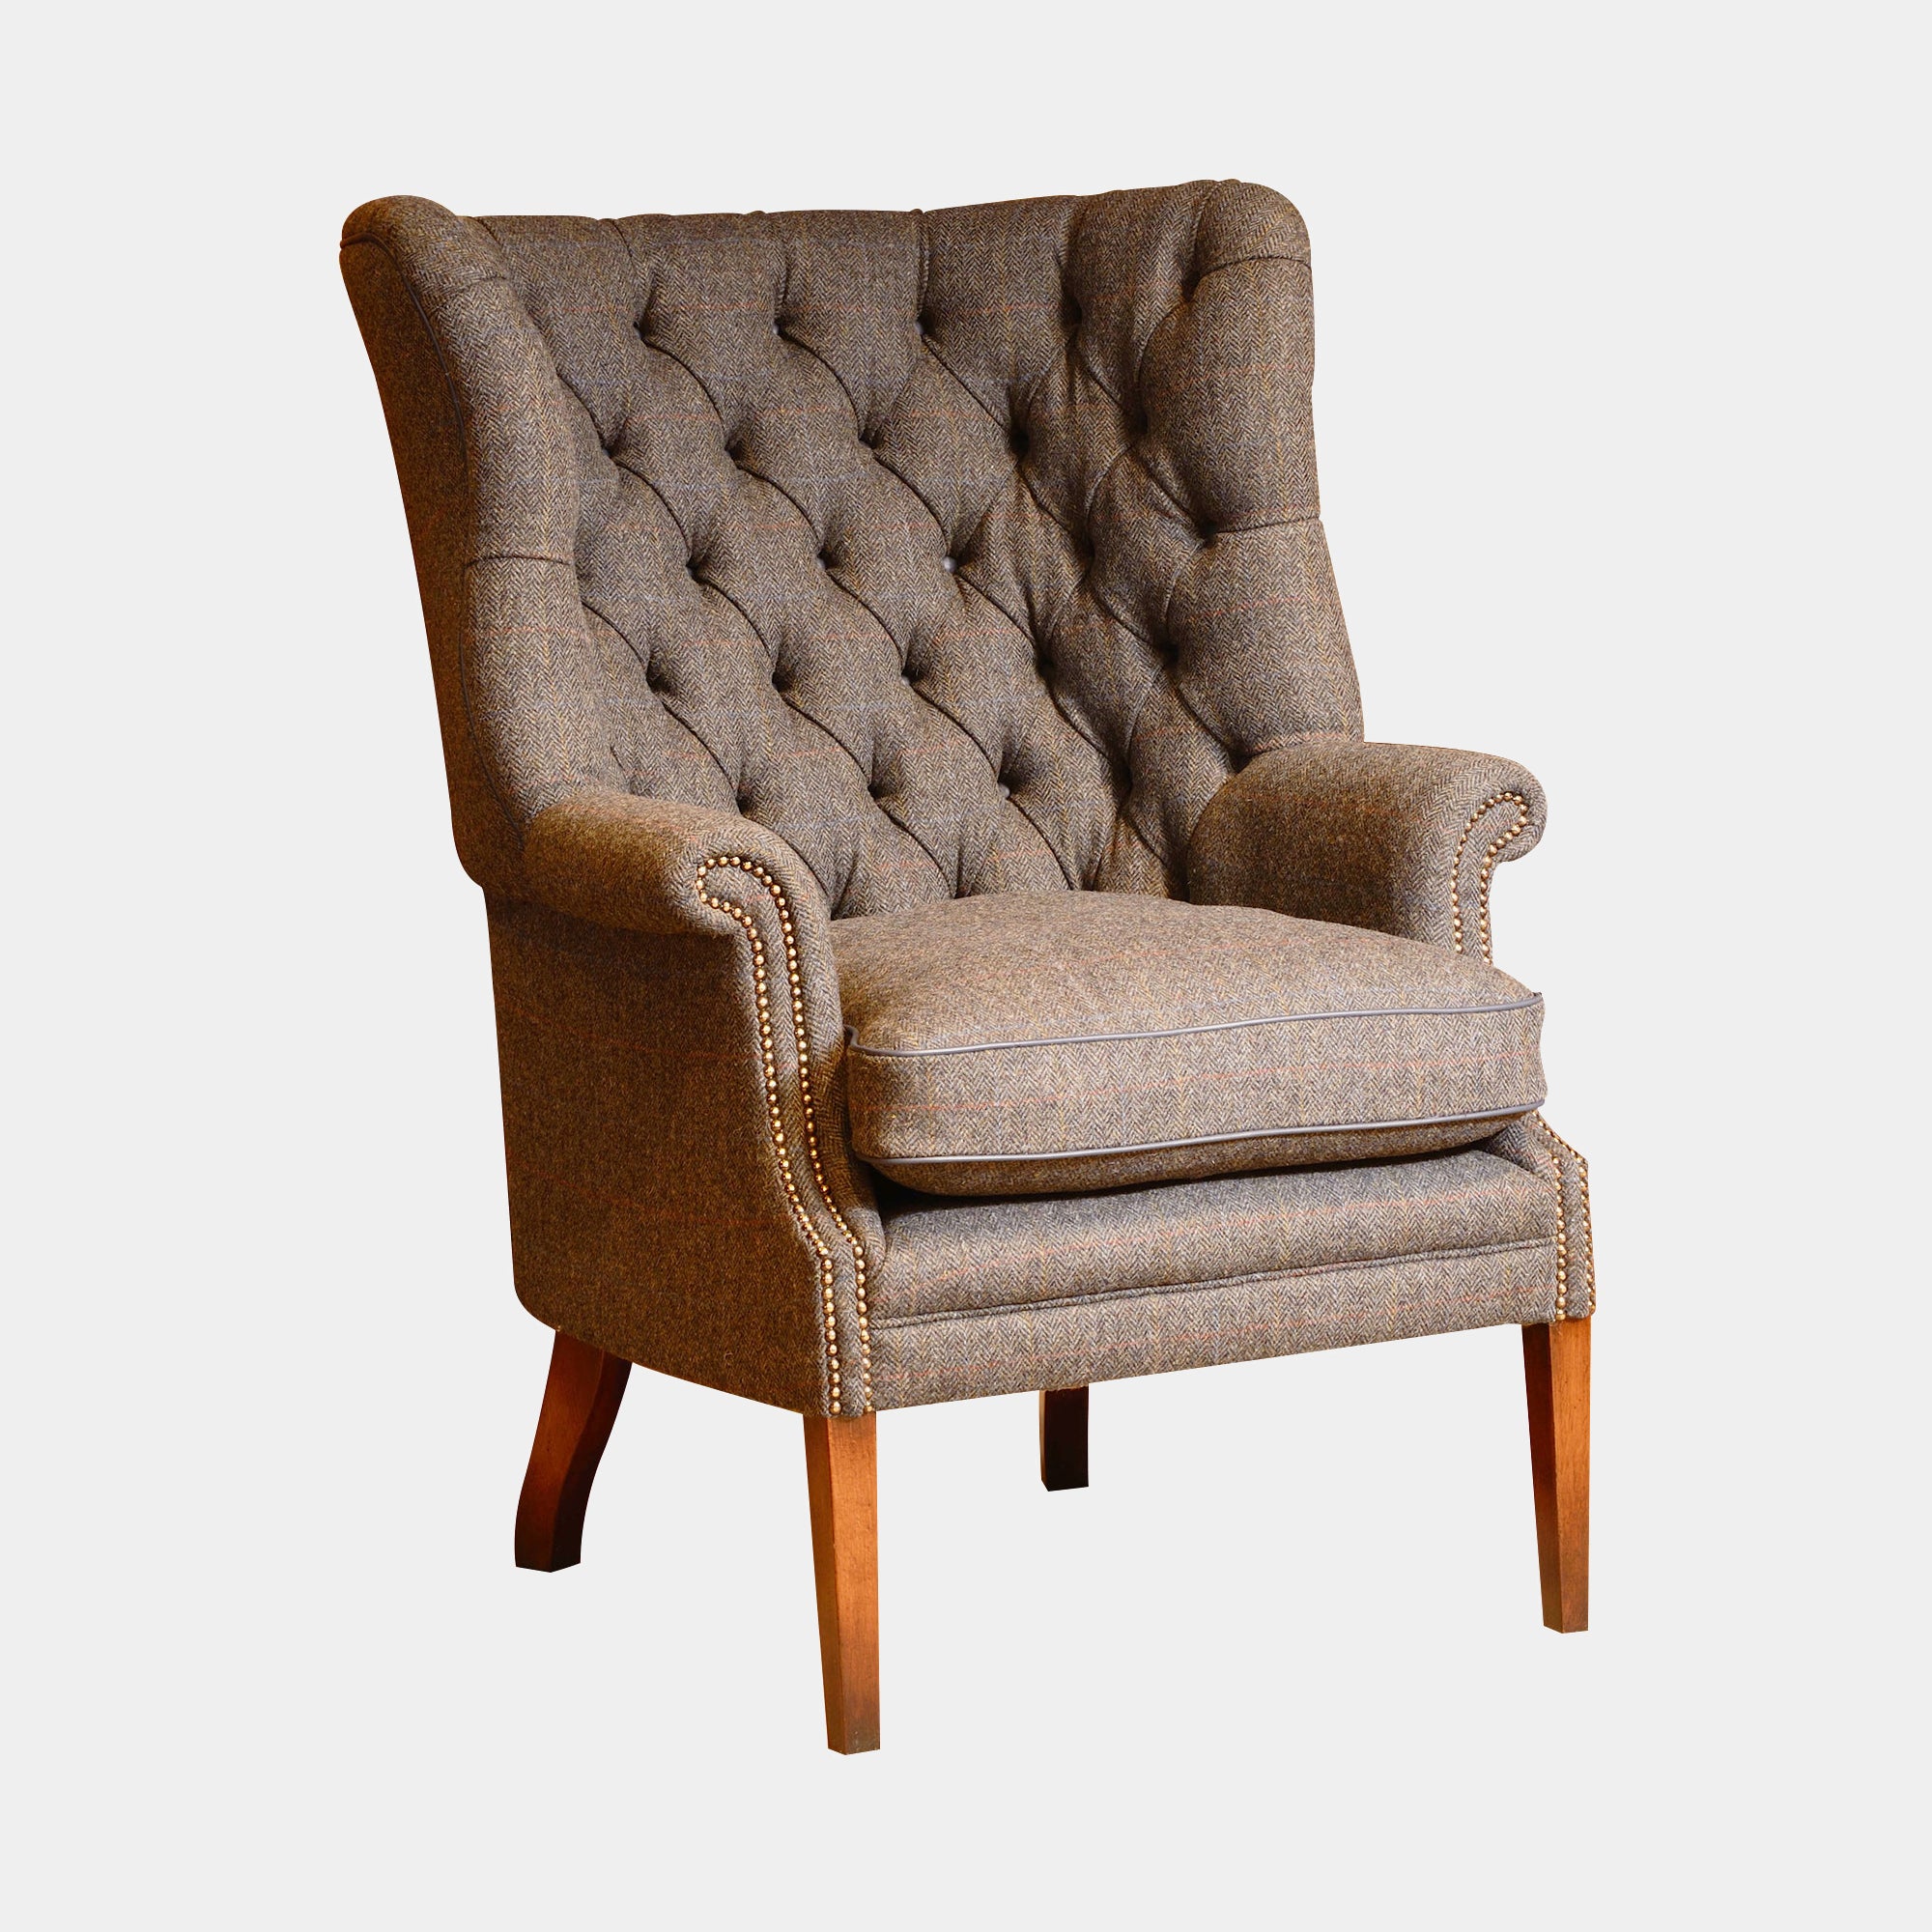 Harris Tweed Wing Chair - Option A - In Fabric With Hide Buttons & Piping